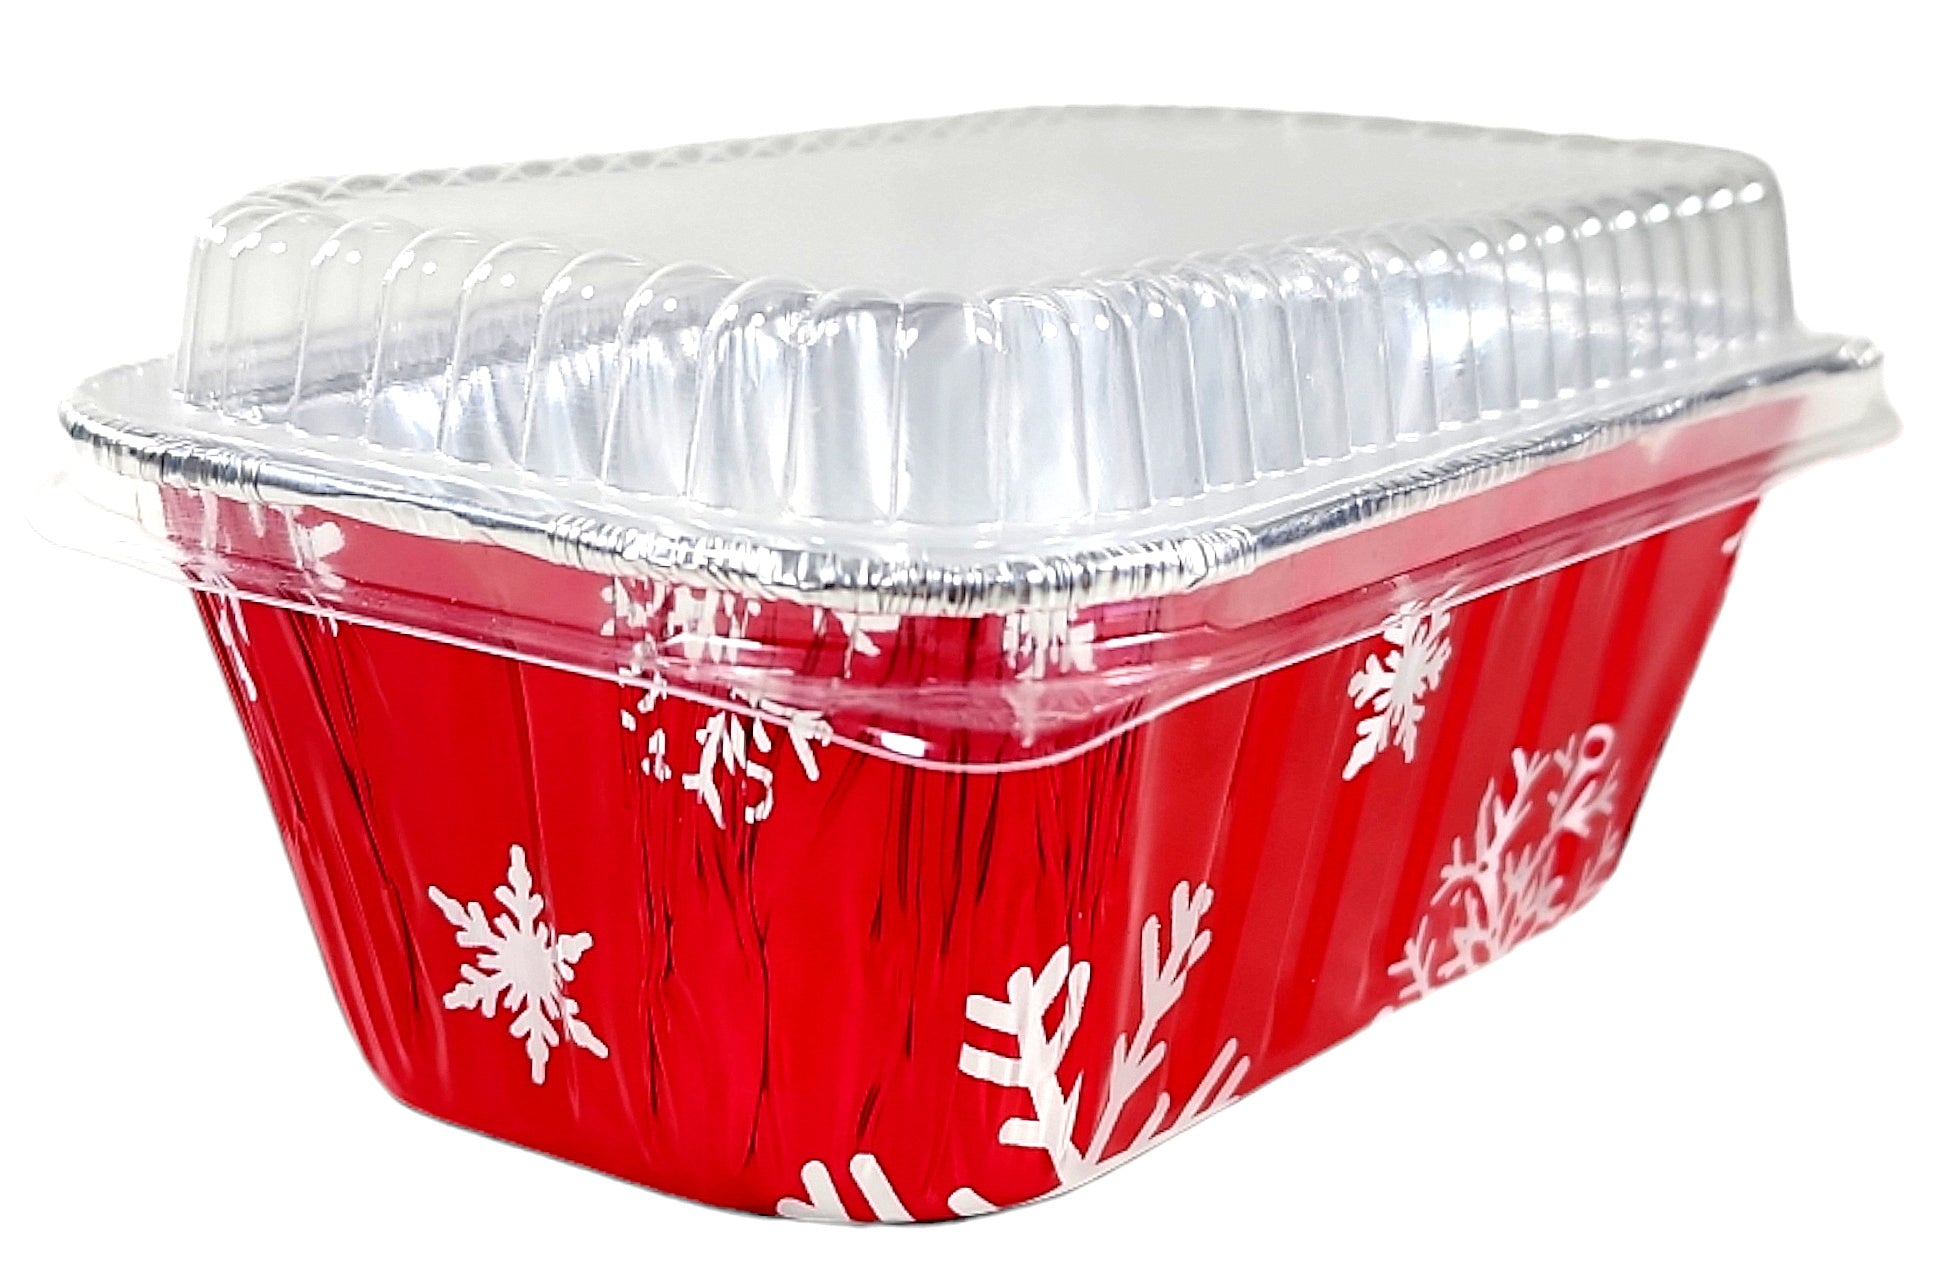 1 lb. Holiday Foil Loaf Pan with Dome Lid - Case of 100 #9302X